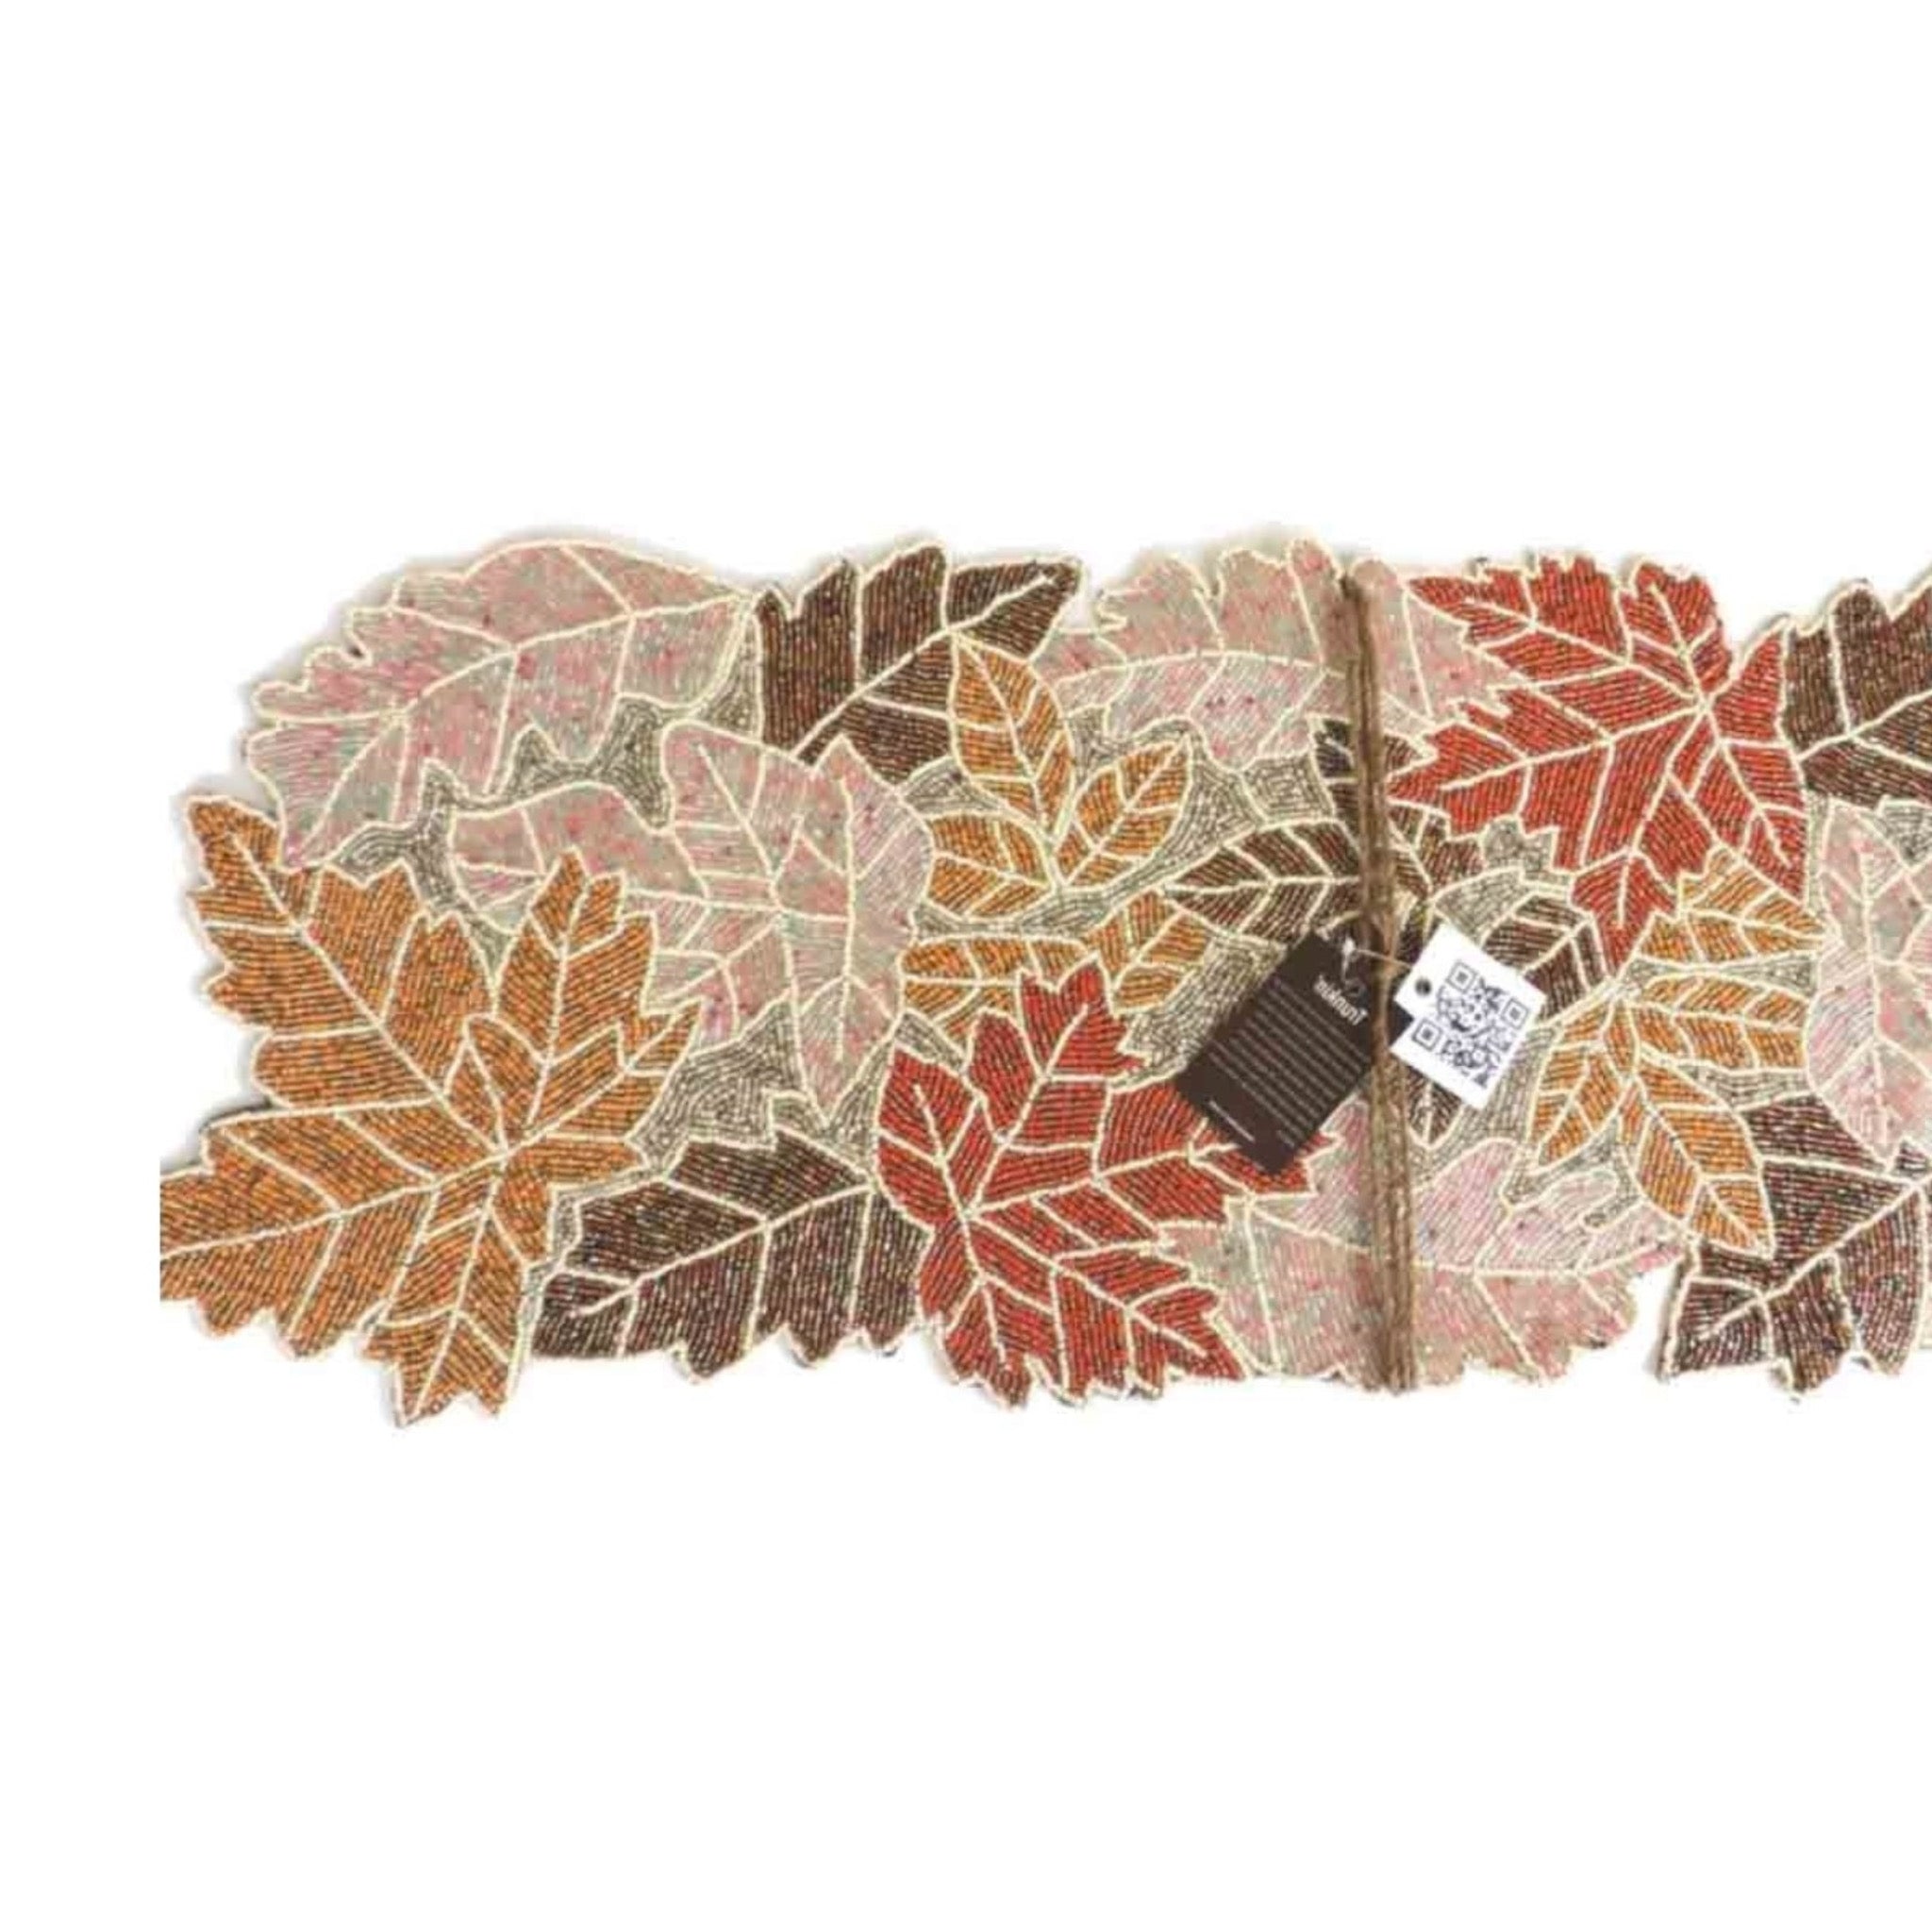 Autumn Leaves Glass Bead Embroidered Table Runner in Autumn Colors